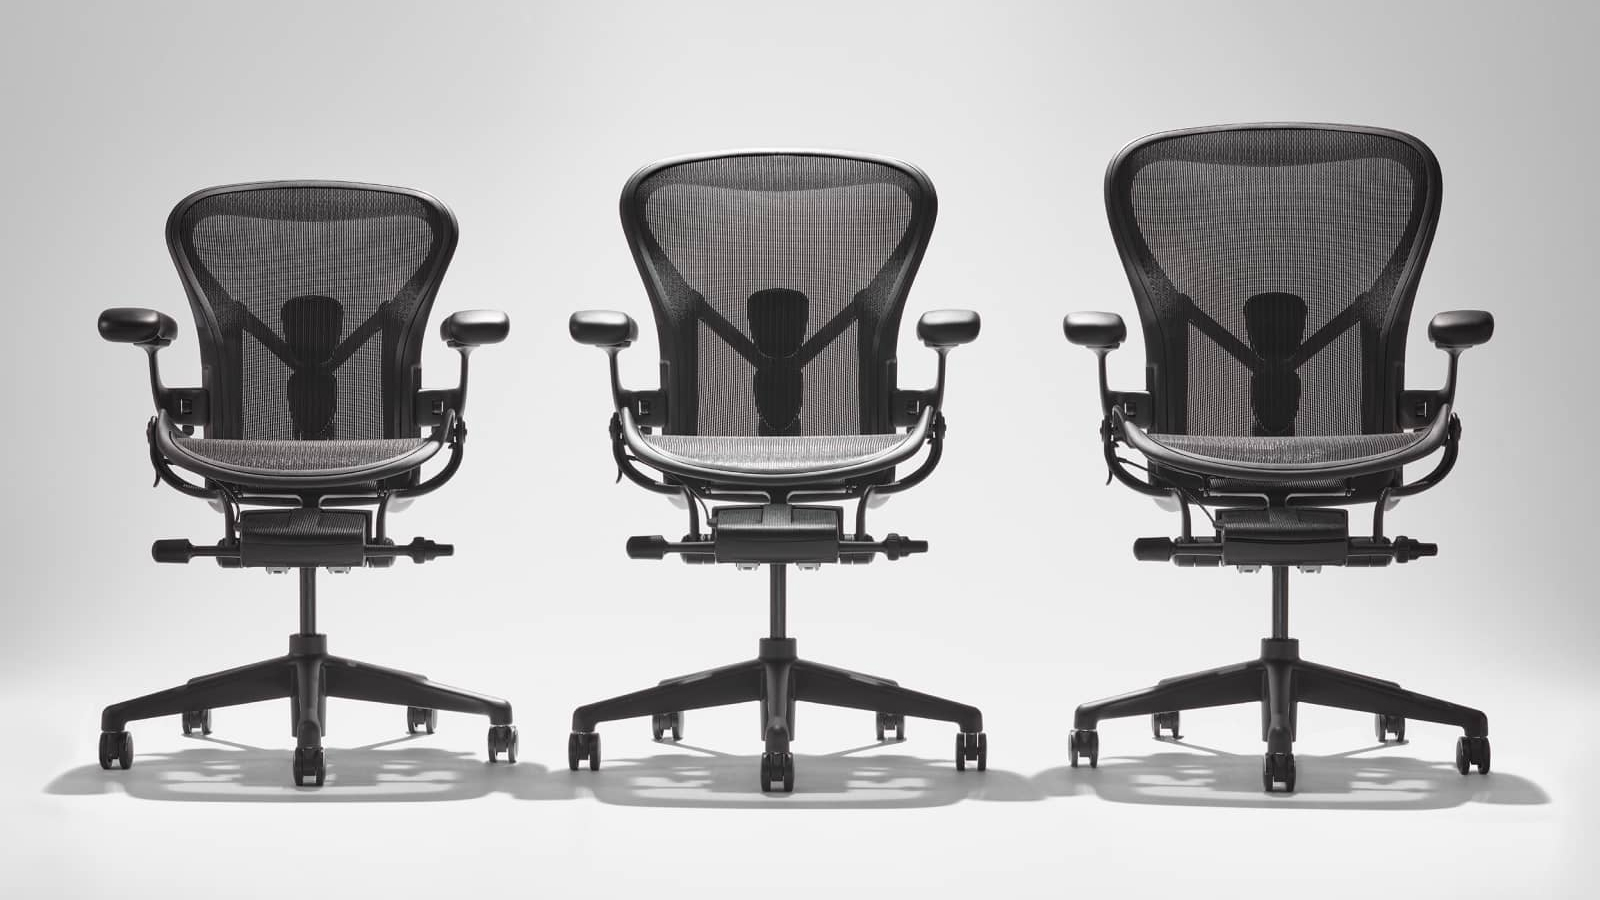 Three Aeron chairs in ascending size order A, B, C.